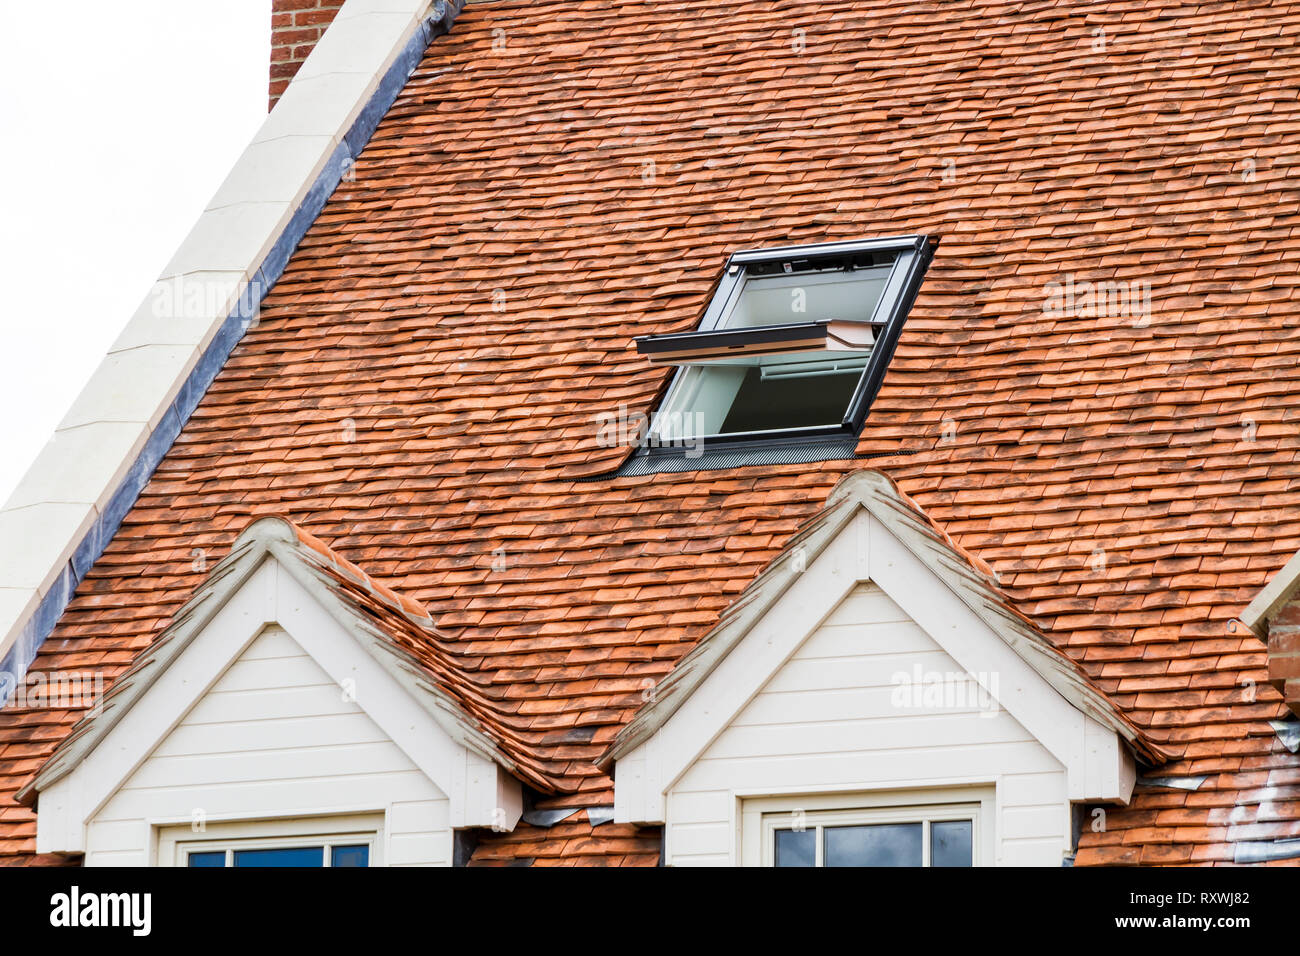 Red tiled roof Stock Photo